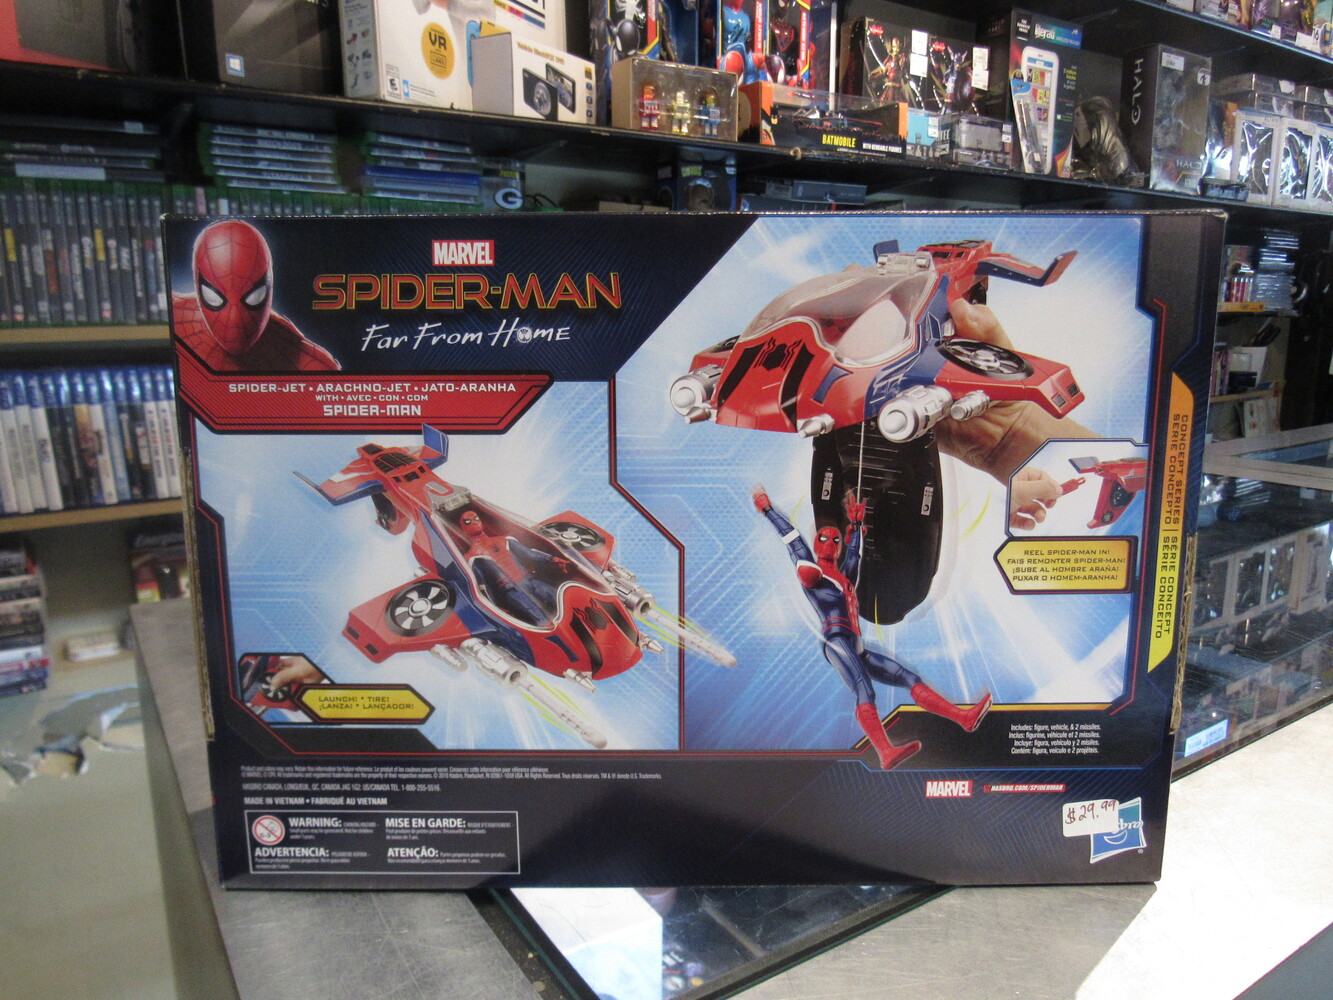 Hasbro Marvel Spider-man Far from Home: Spider Jet with Spider-man toy